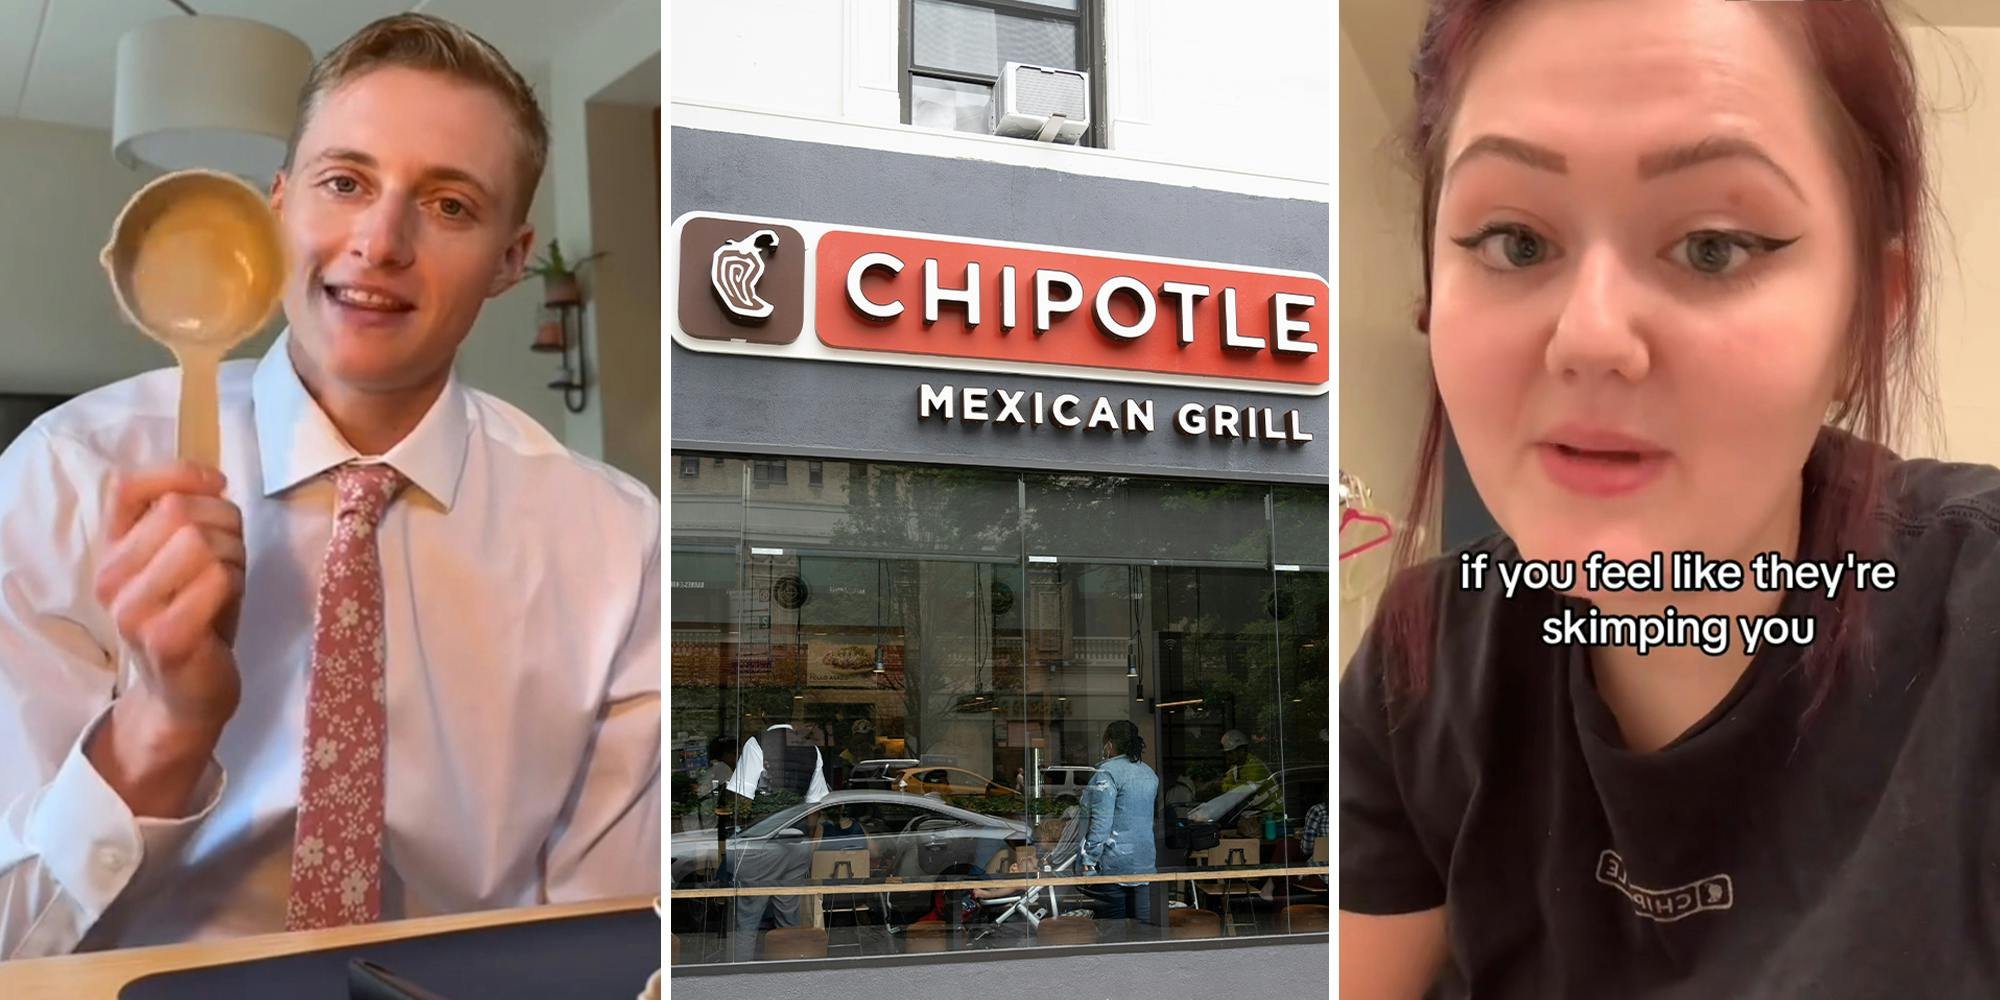 ‘Jokes on them. I’ve stopped going all together’: Ex-Chipotle worker reveals the reason why employees purposely ‘skimp you’ on food